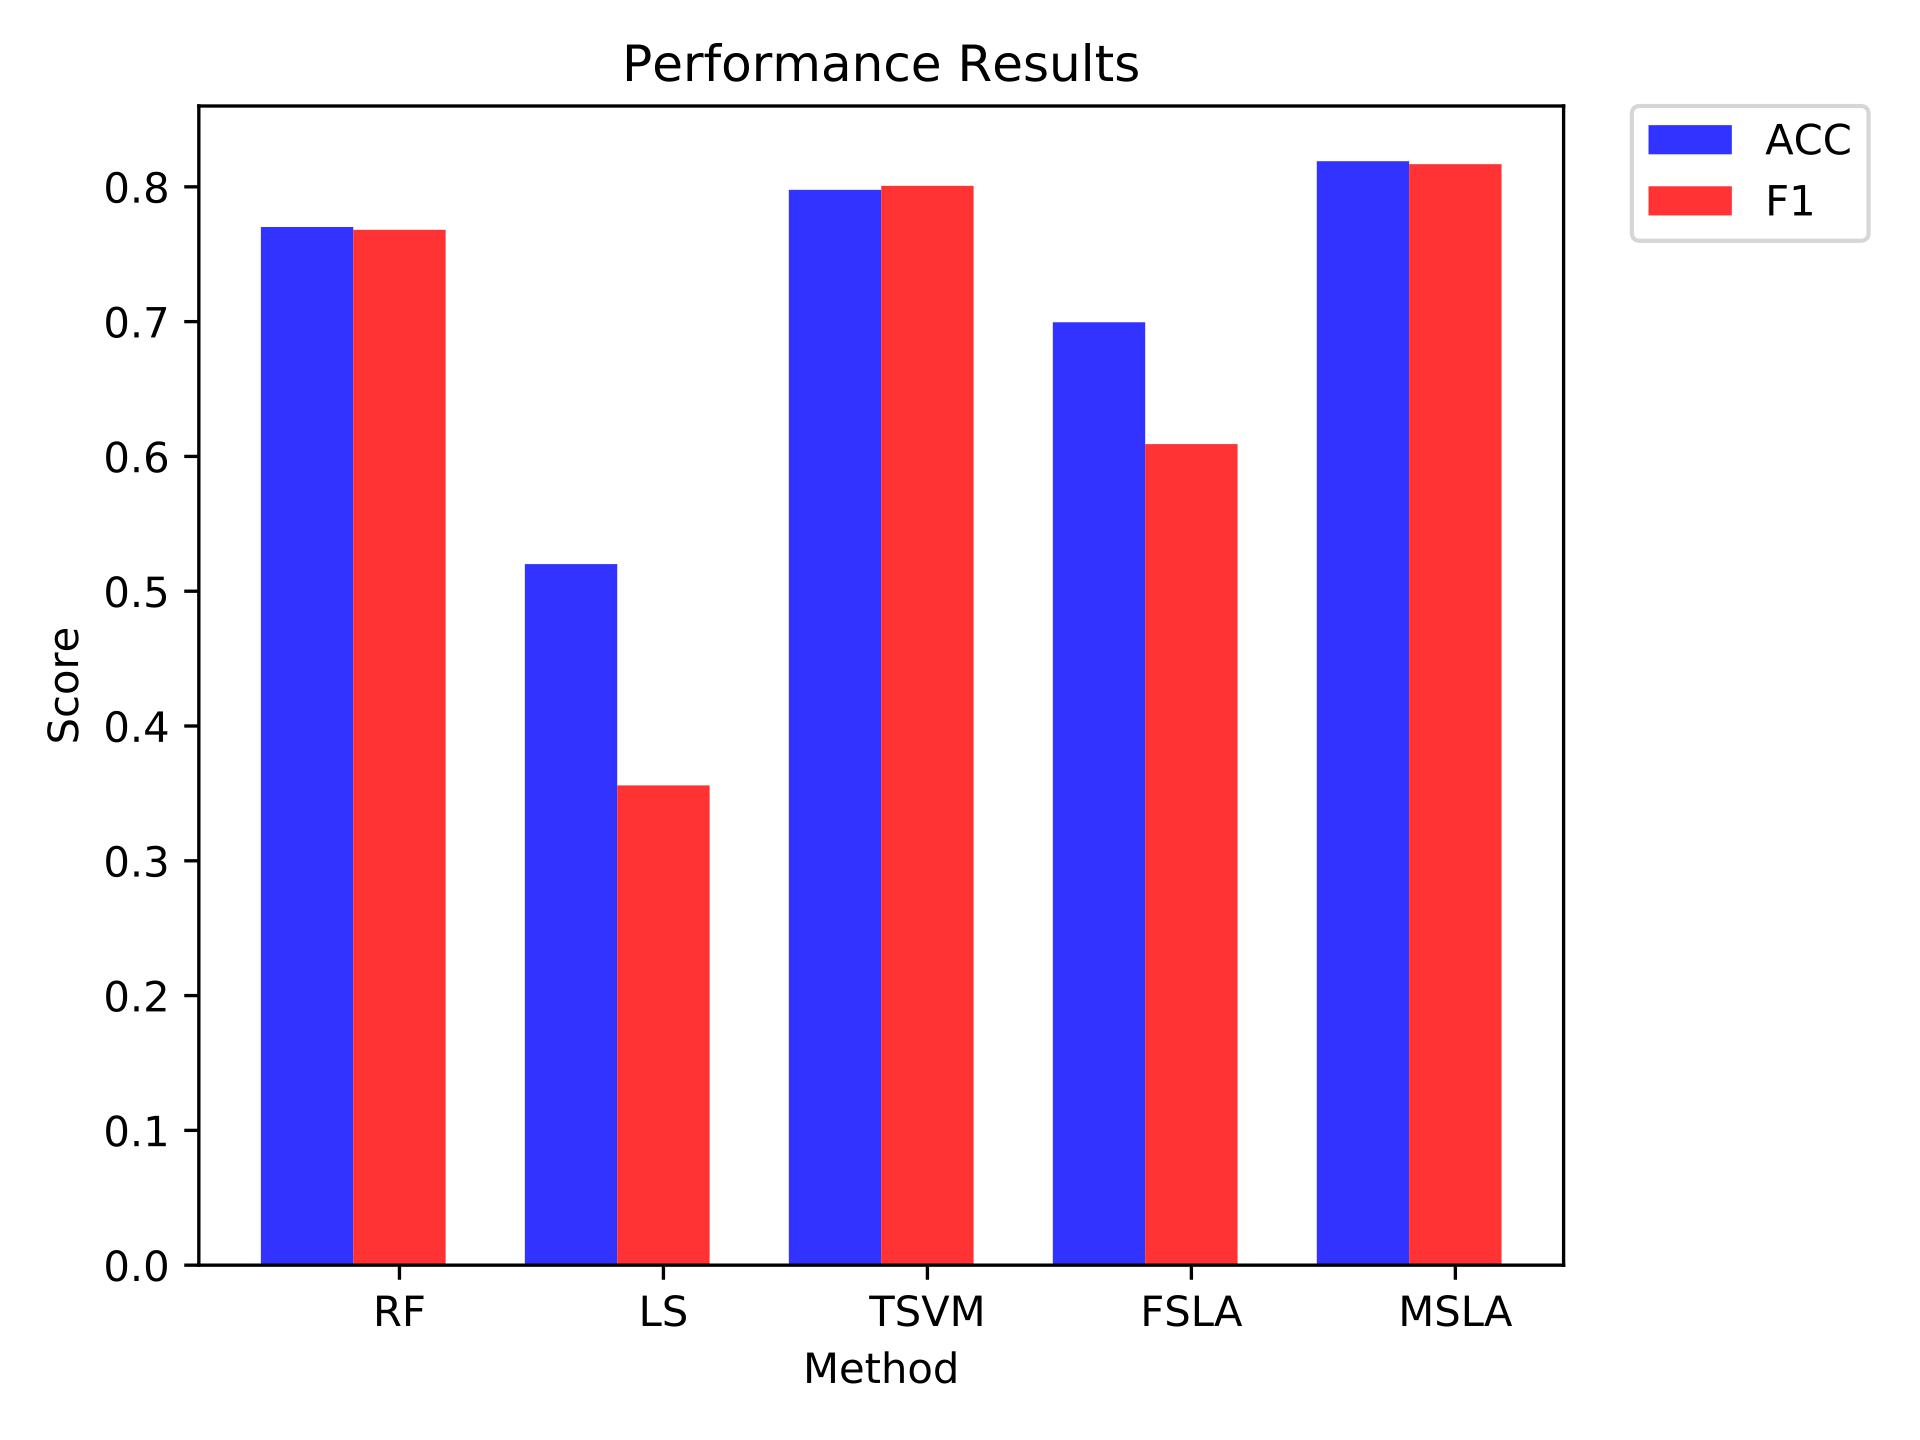 The performance results of the simple test